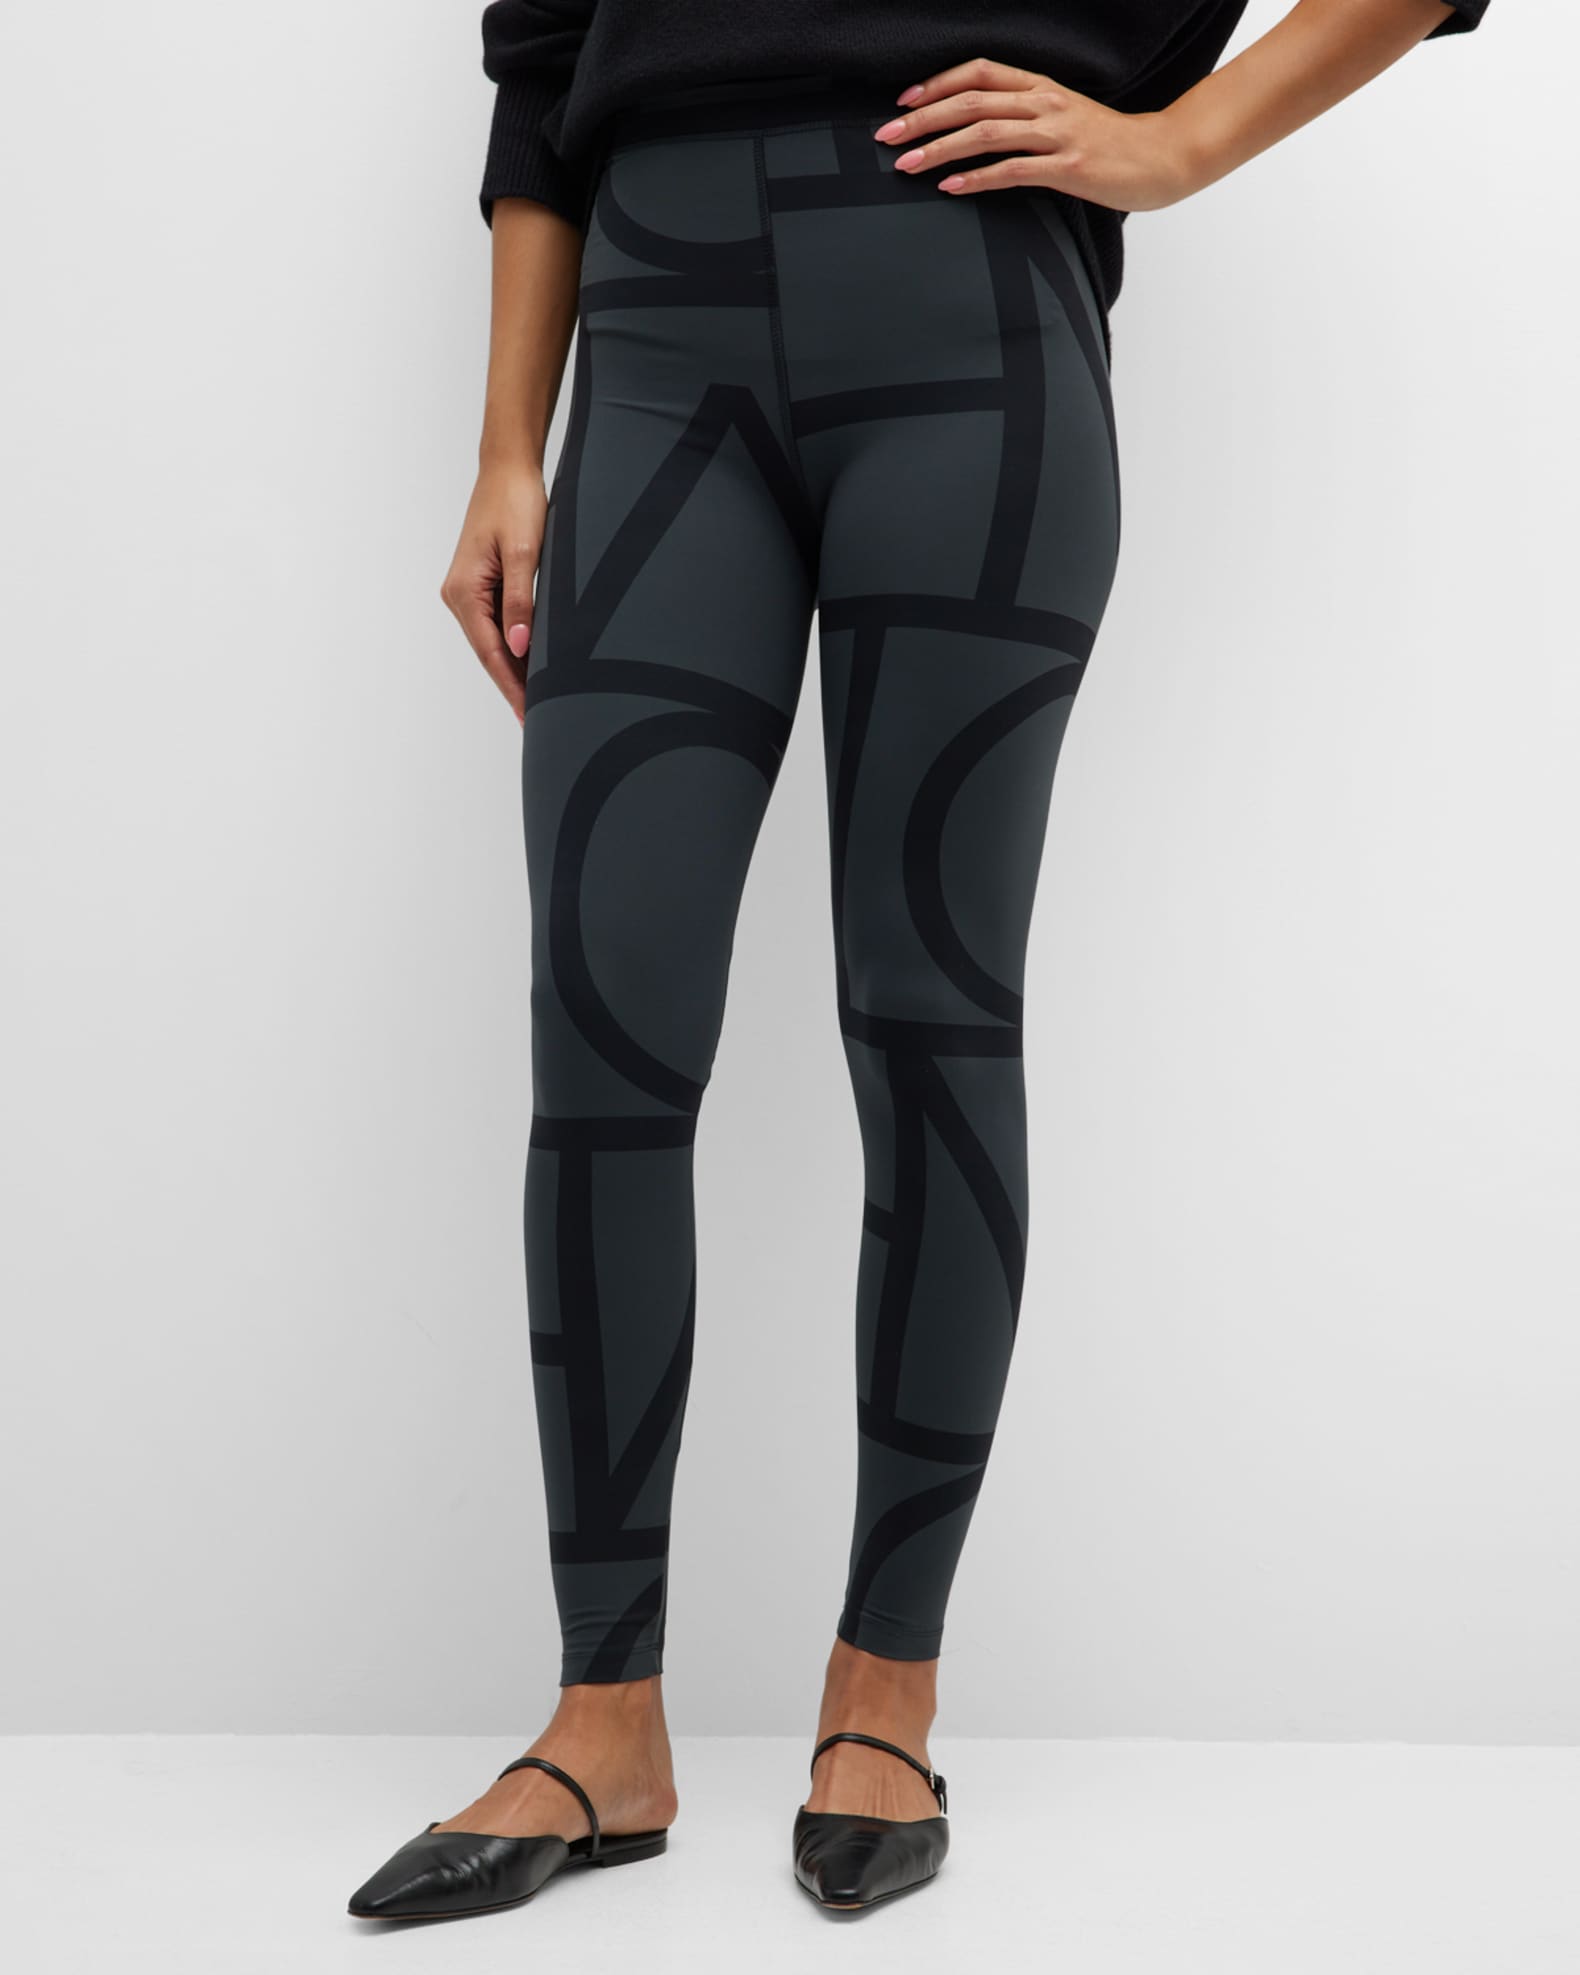 Women's Leggings With Zip by Toteme